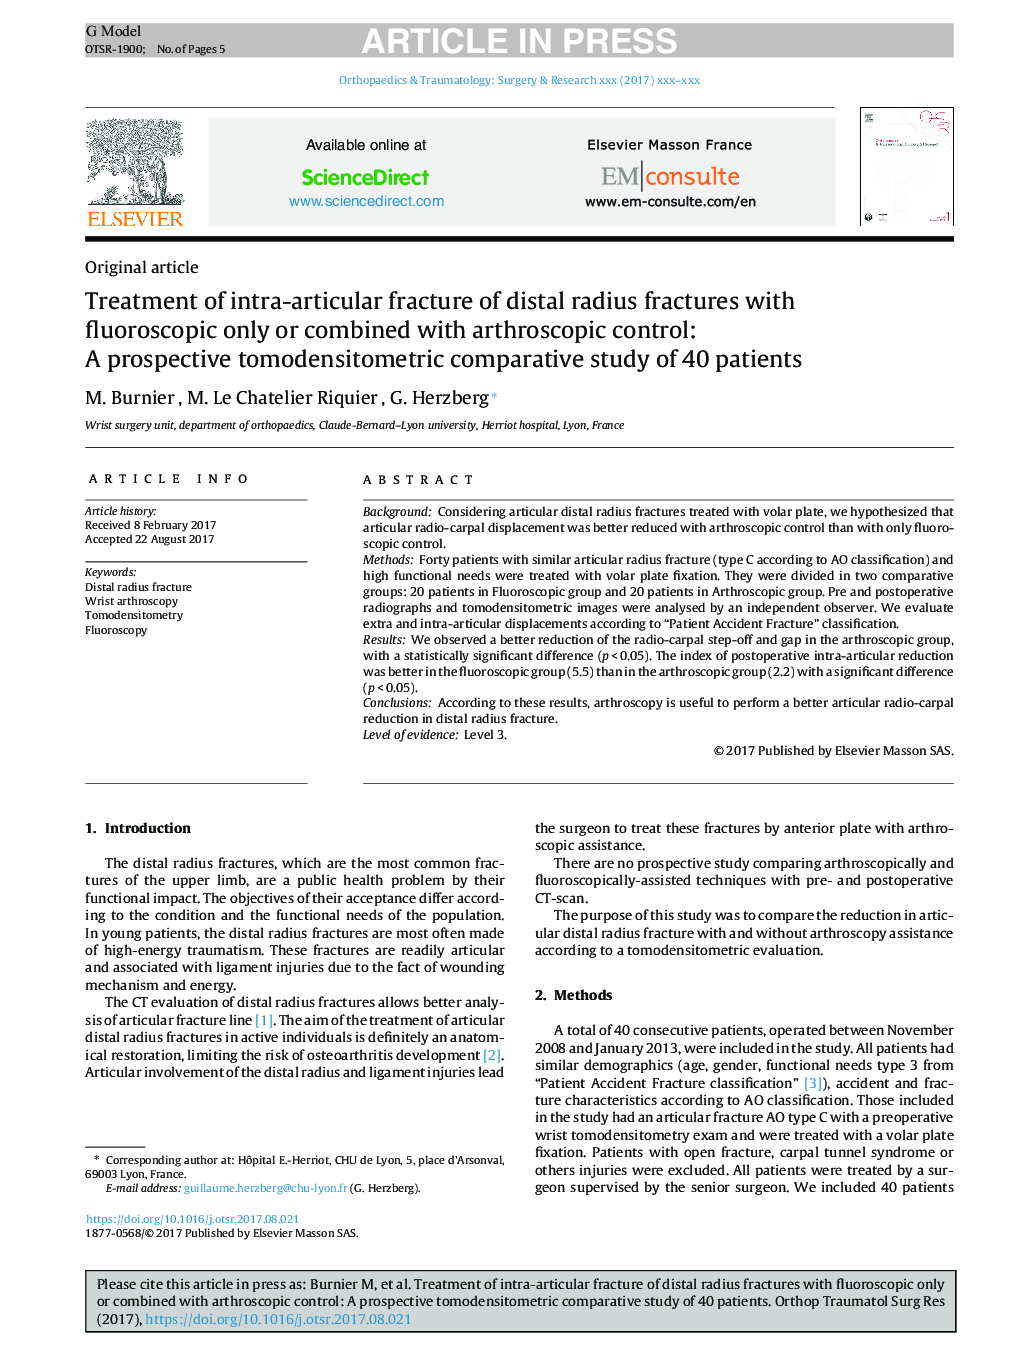 Treatment of intra-articular fracture of distal radius fractures with fluoroscopic only or combined with arthroscopic control: A prospective tomodensitometric comparative study of 40Â patients